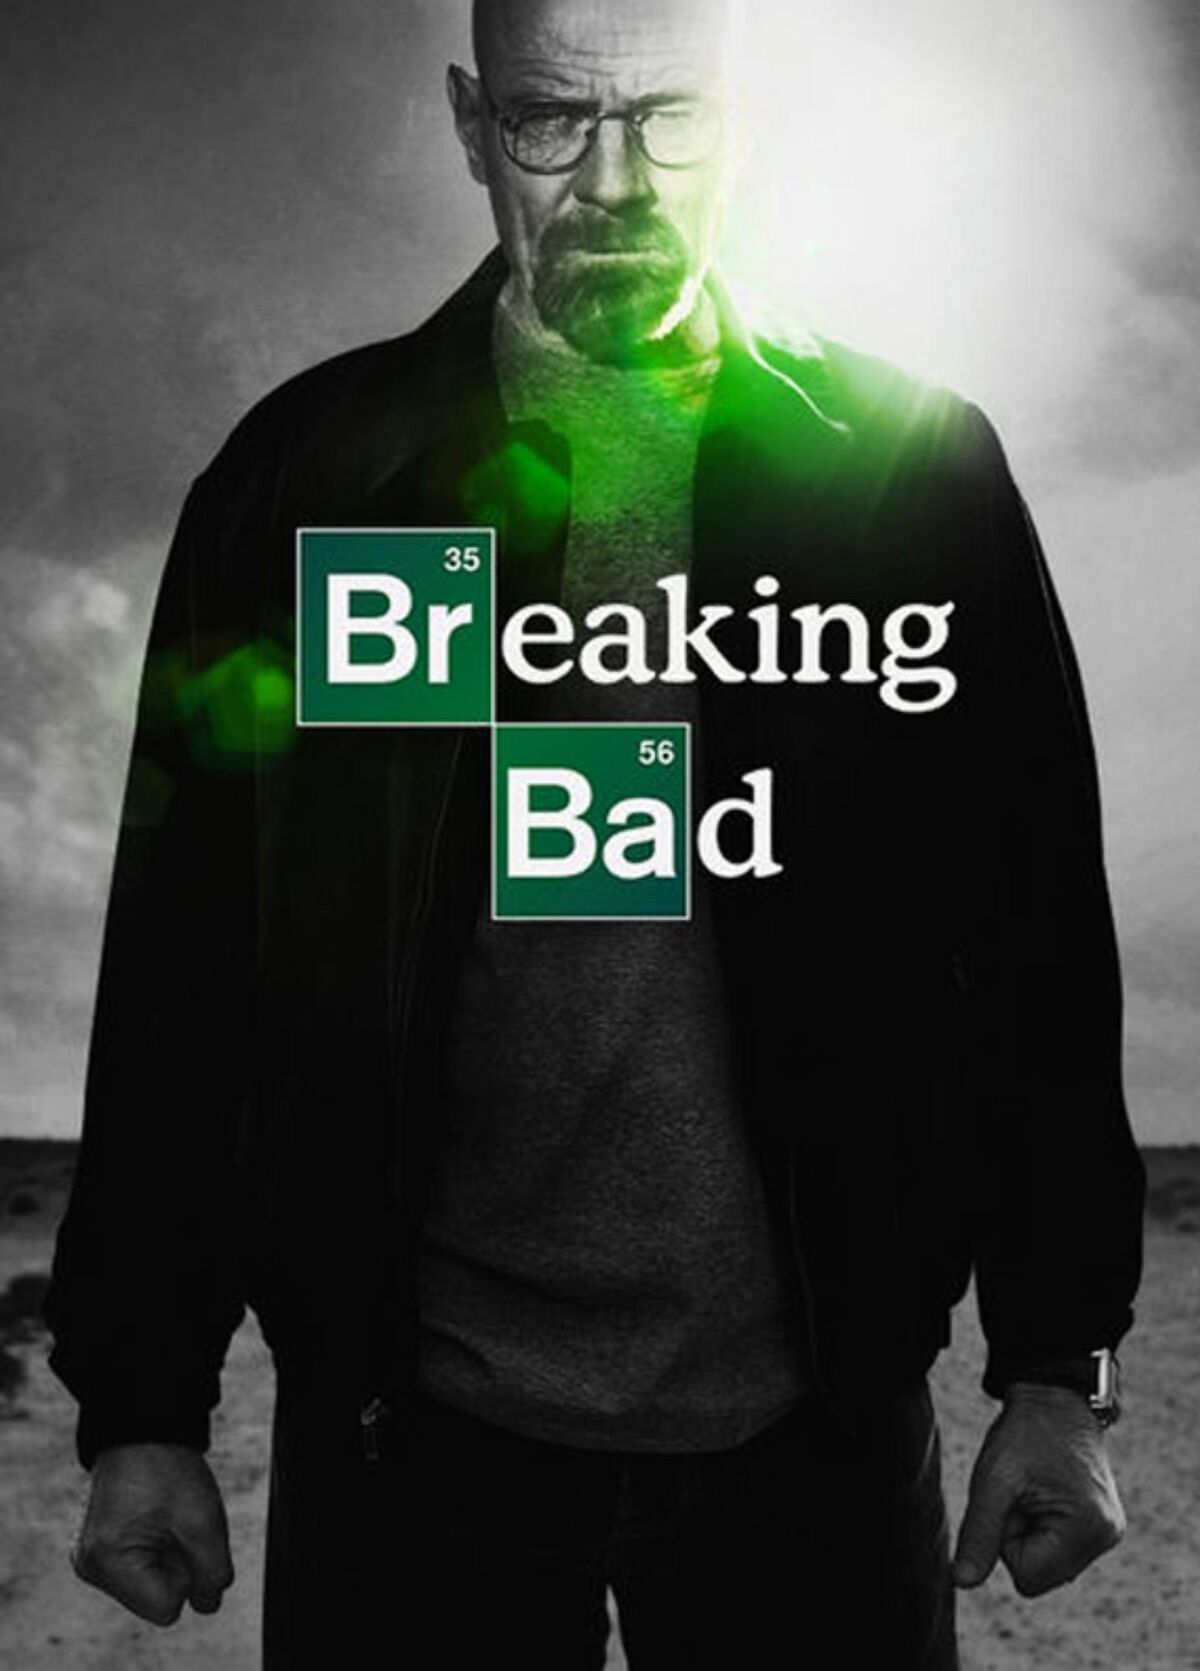 https://static.wikia.nocookie.net/listofdeaths/images/7/70/Breaking_Bad_poster.jpg/revision/latest/scale-to-width-down/1200?cb=20201008191417